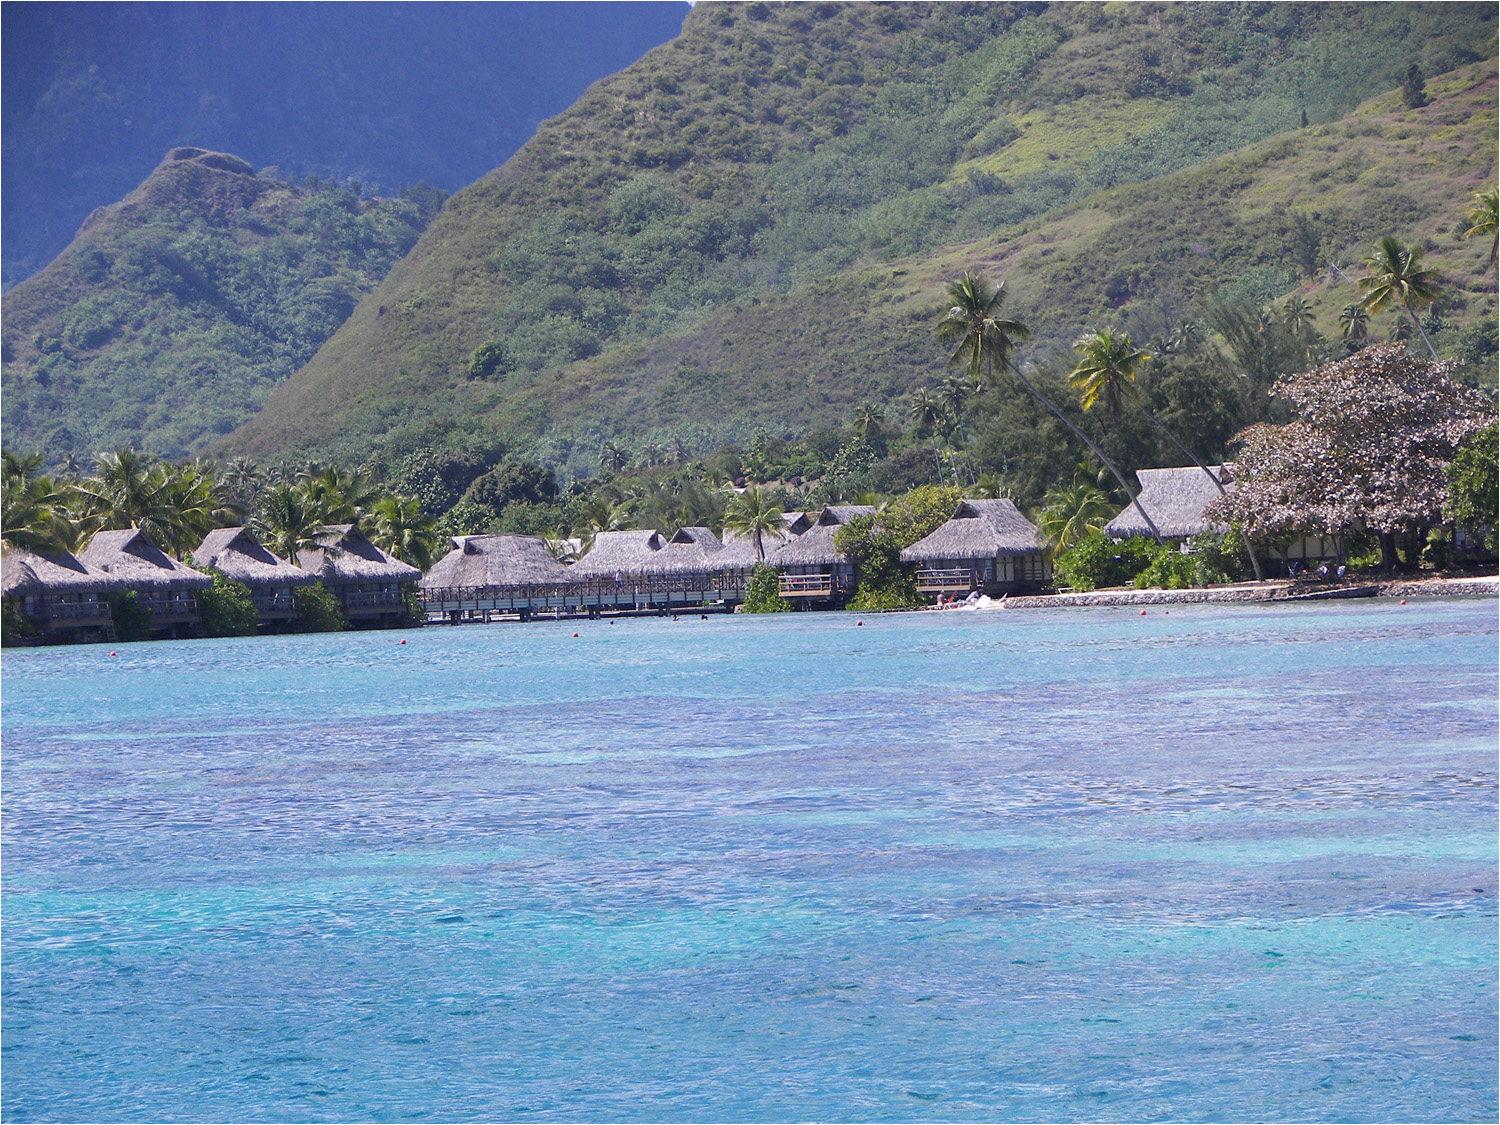 This is the Intercontinental Moorea resort where we stayed 10 years ago.